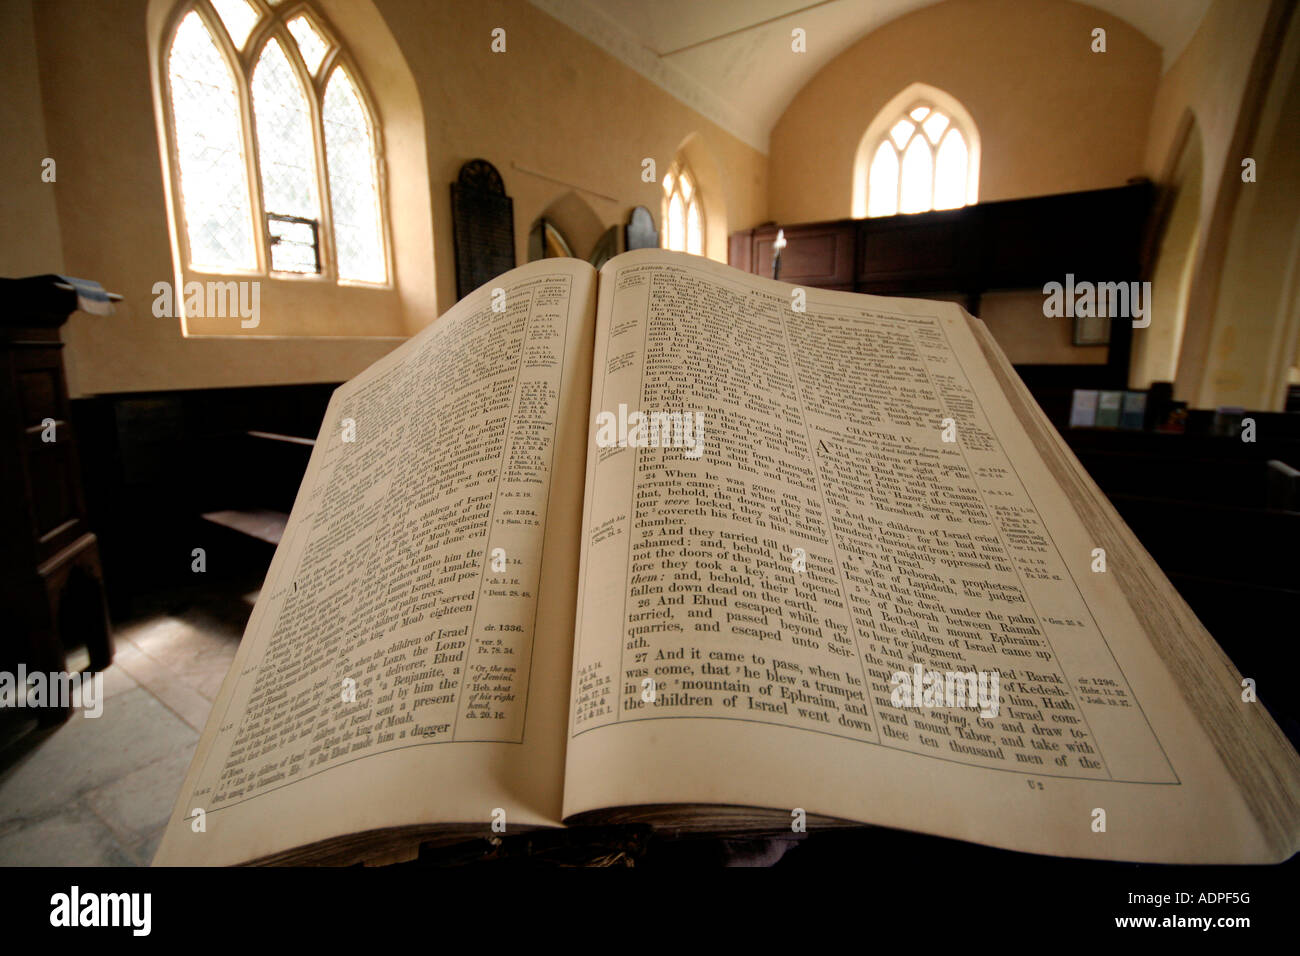 Bible in The parish church of the Blessed Virgin Mary Emborough Mendip district Somerset UK Stock Photo